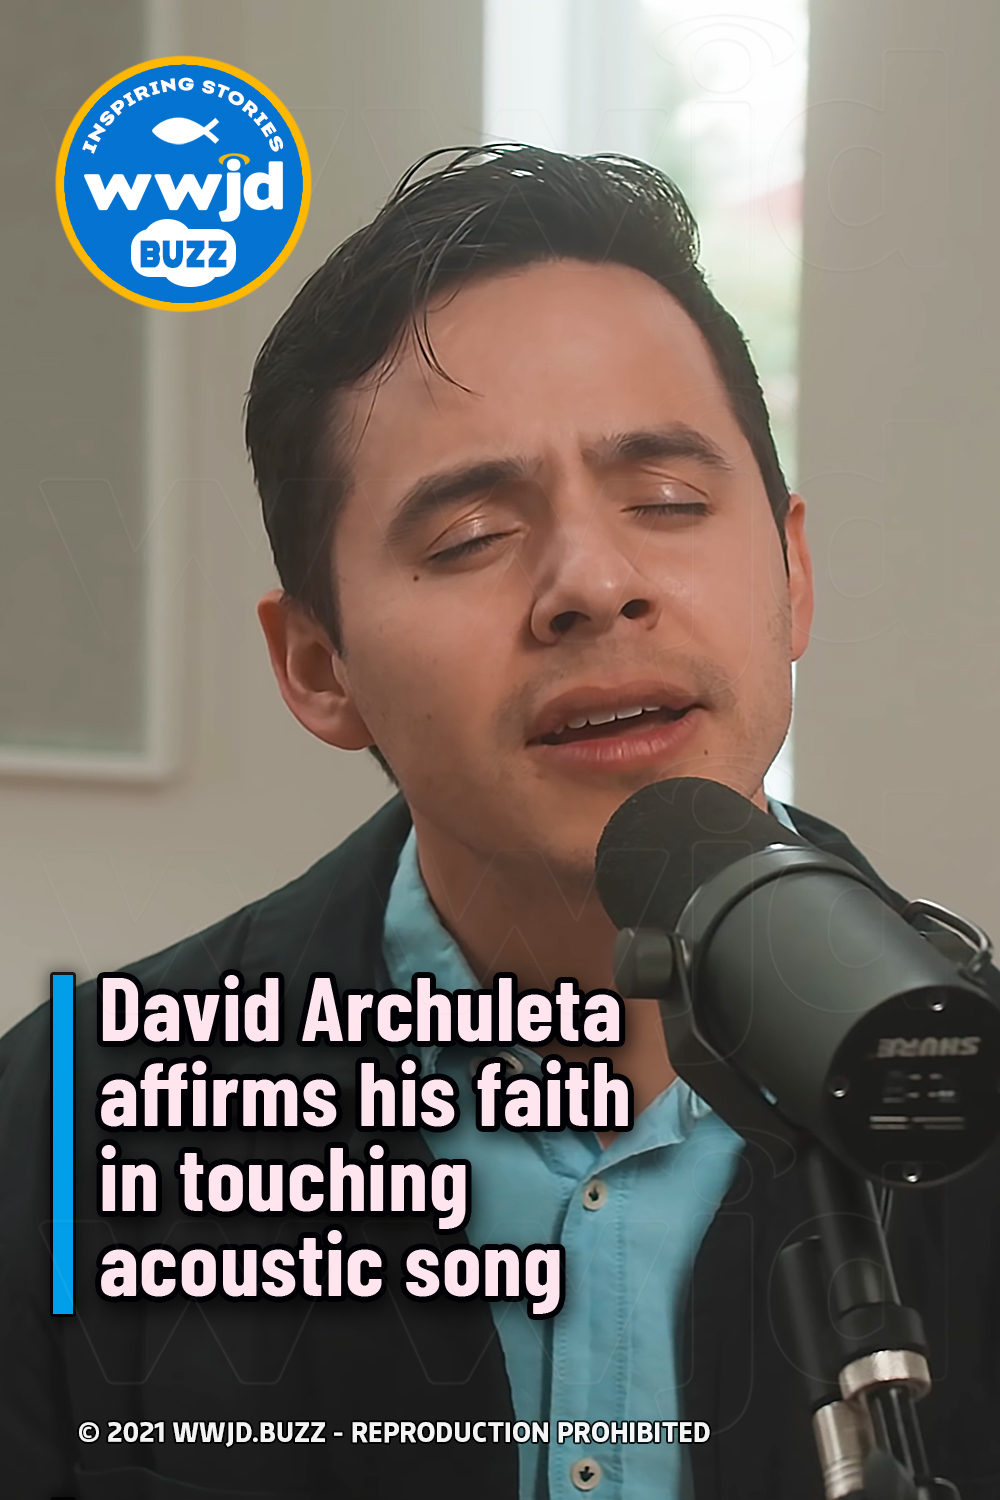 David Archuleta affirms his faith in touching acoustic song